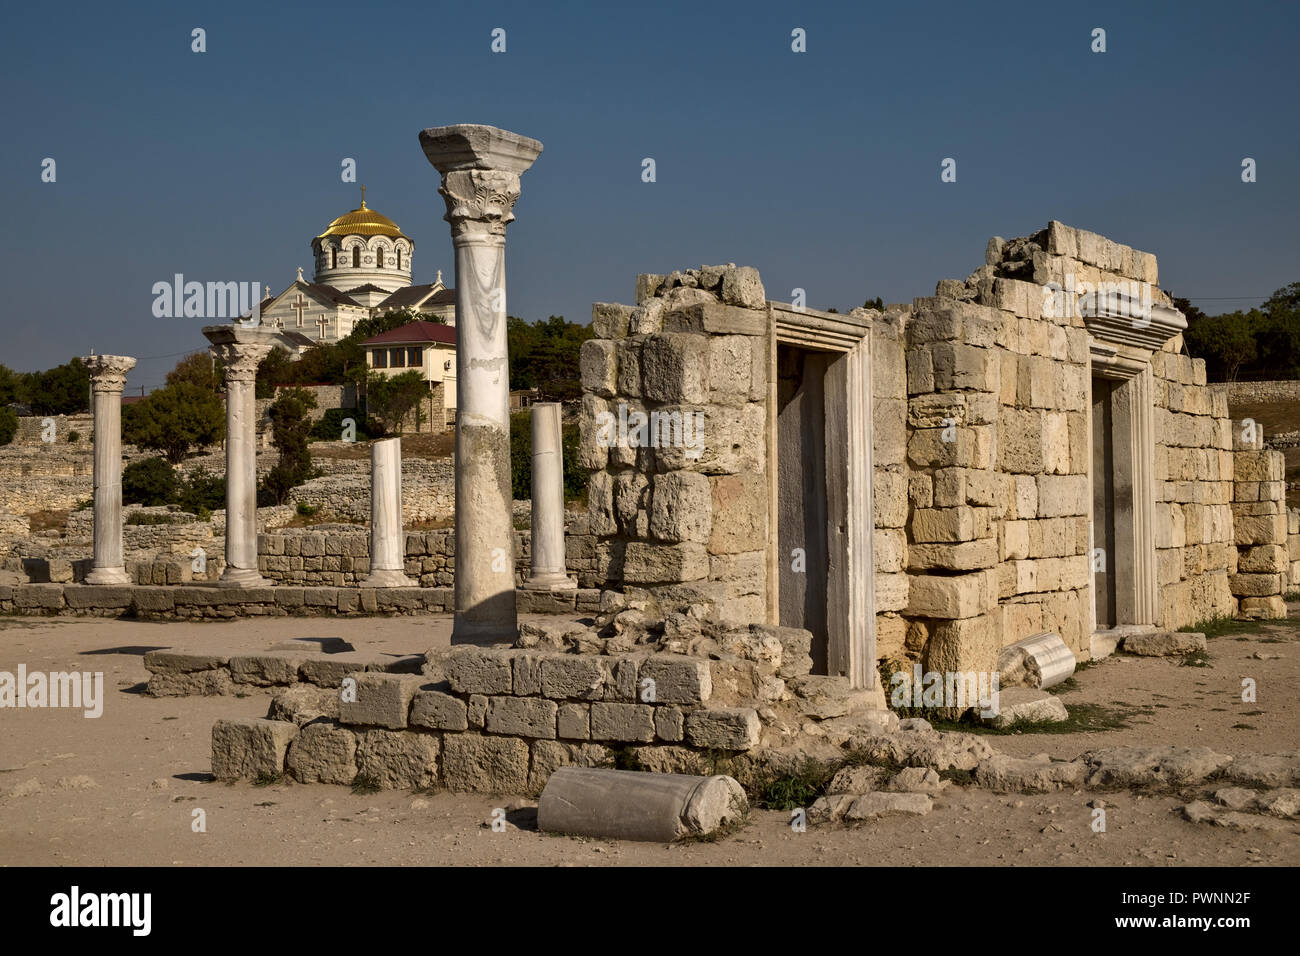 Tauric Chersonese and St. Vladimir's Cathedral in Sevastopol, Crimea Stock Photo